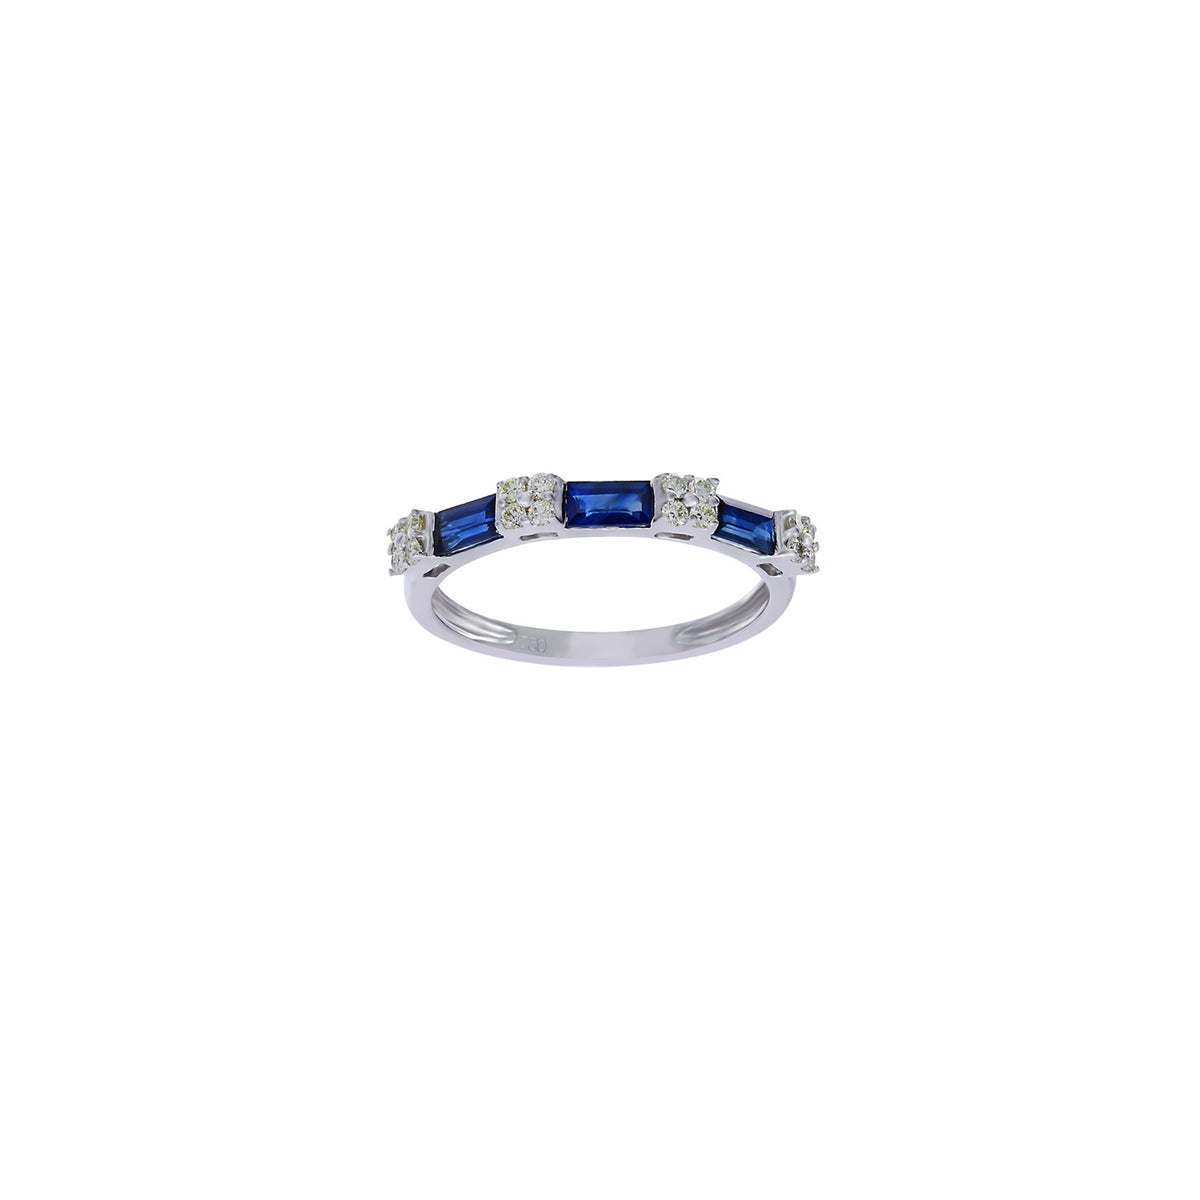 Diamond and Sapphire Ring. Eternity Ring